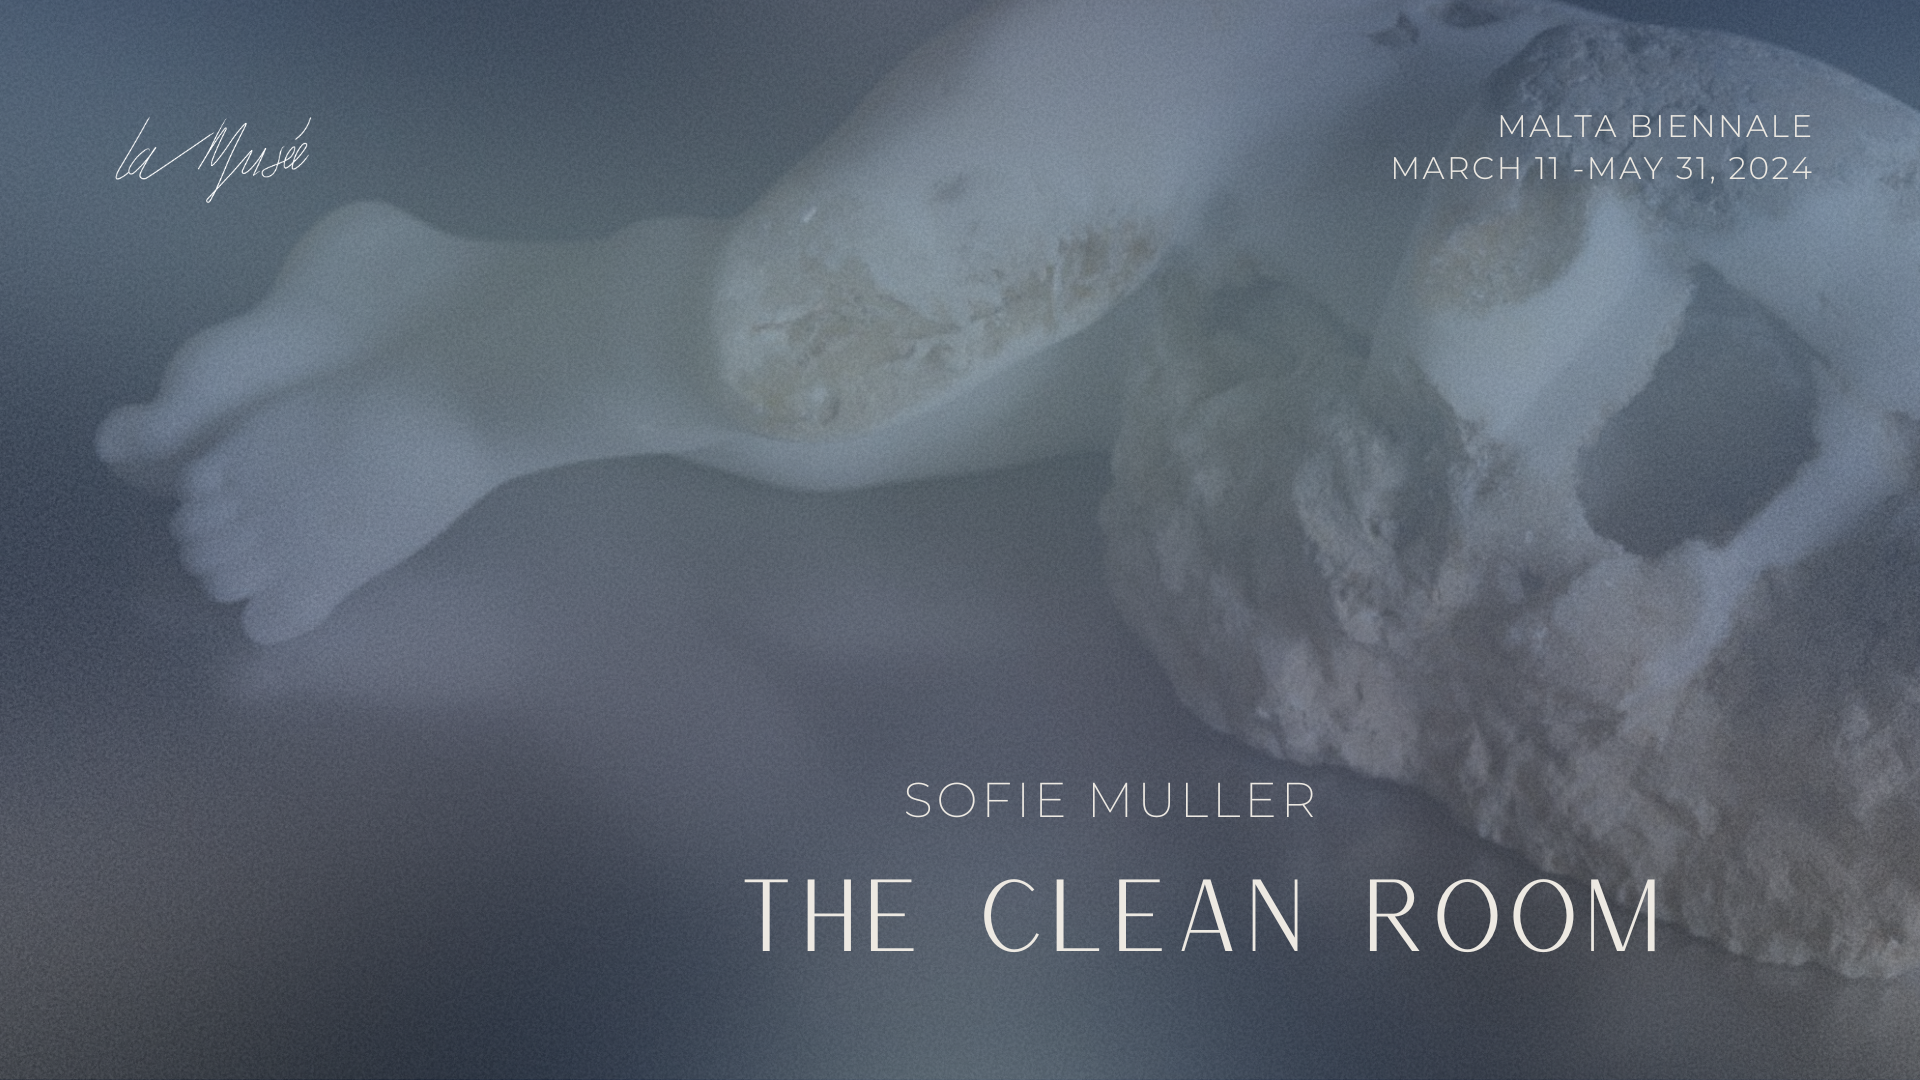 Sofie Muller: The Clean Room